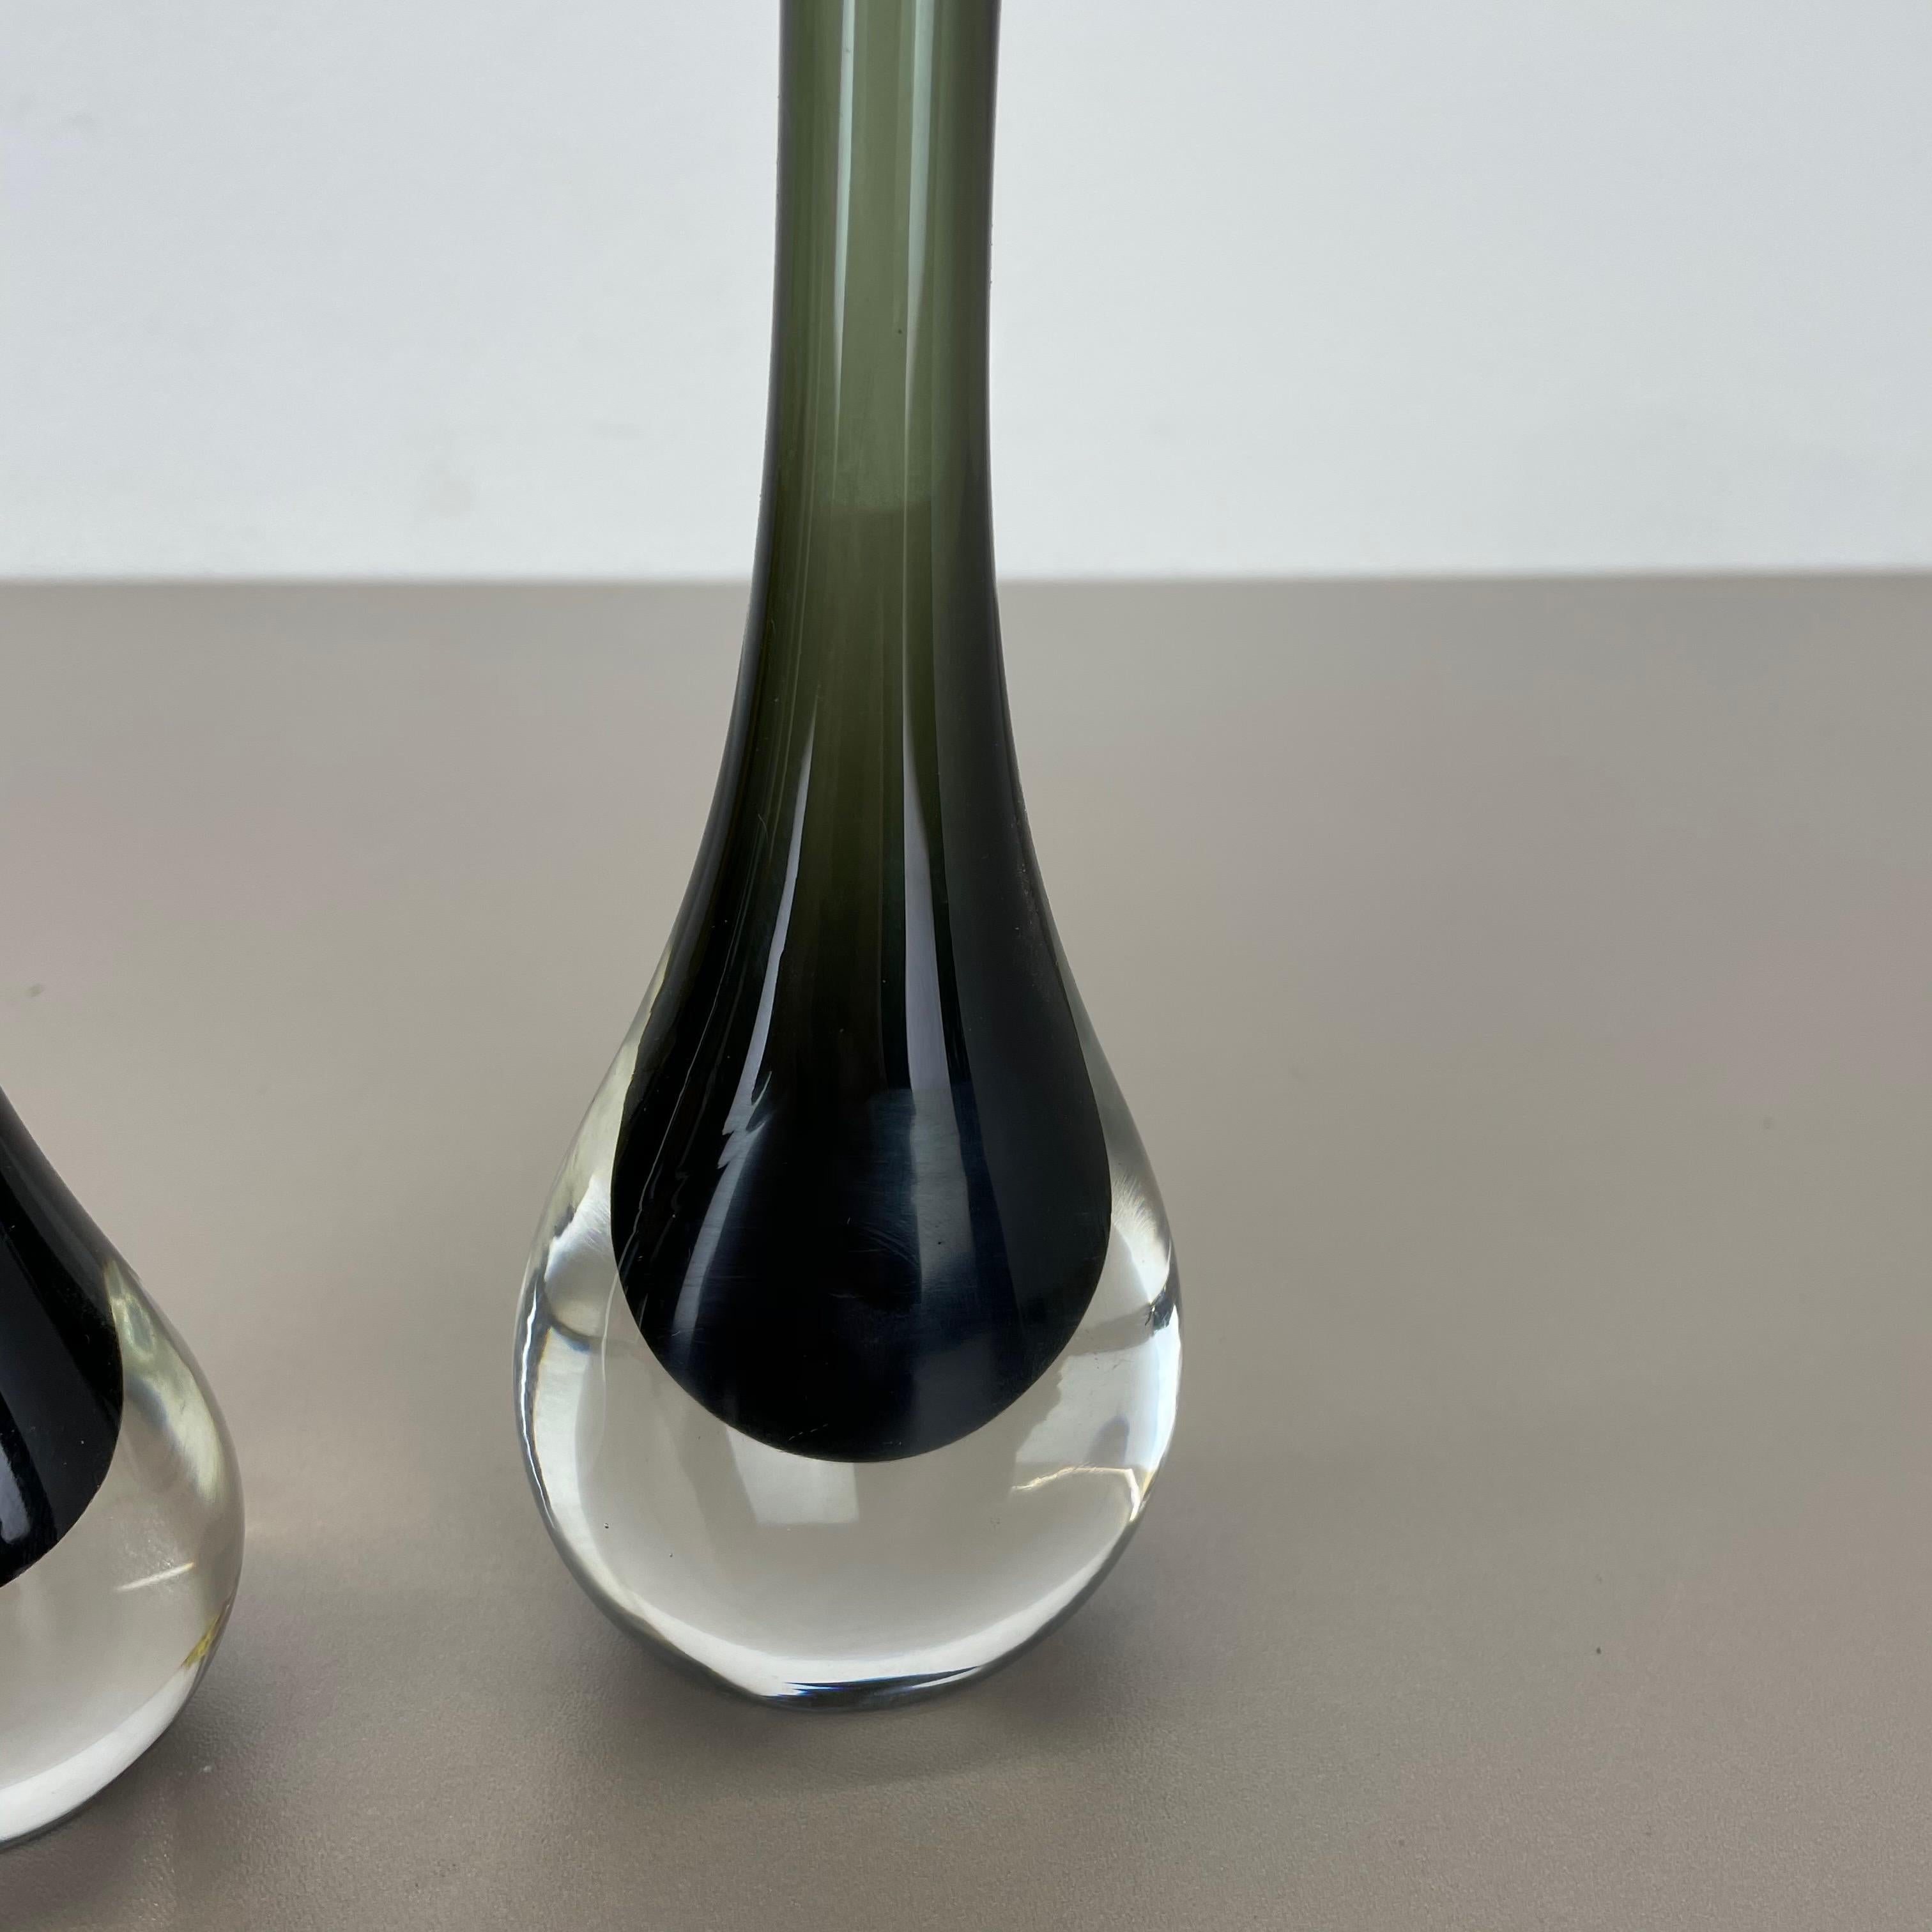 Set of 2 New Old Stock Murano Opaline Glass by Antonio da Ros, Cenedese, 1960s For Sale 2